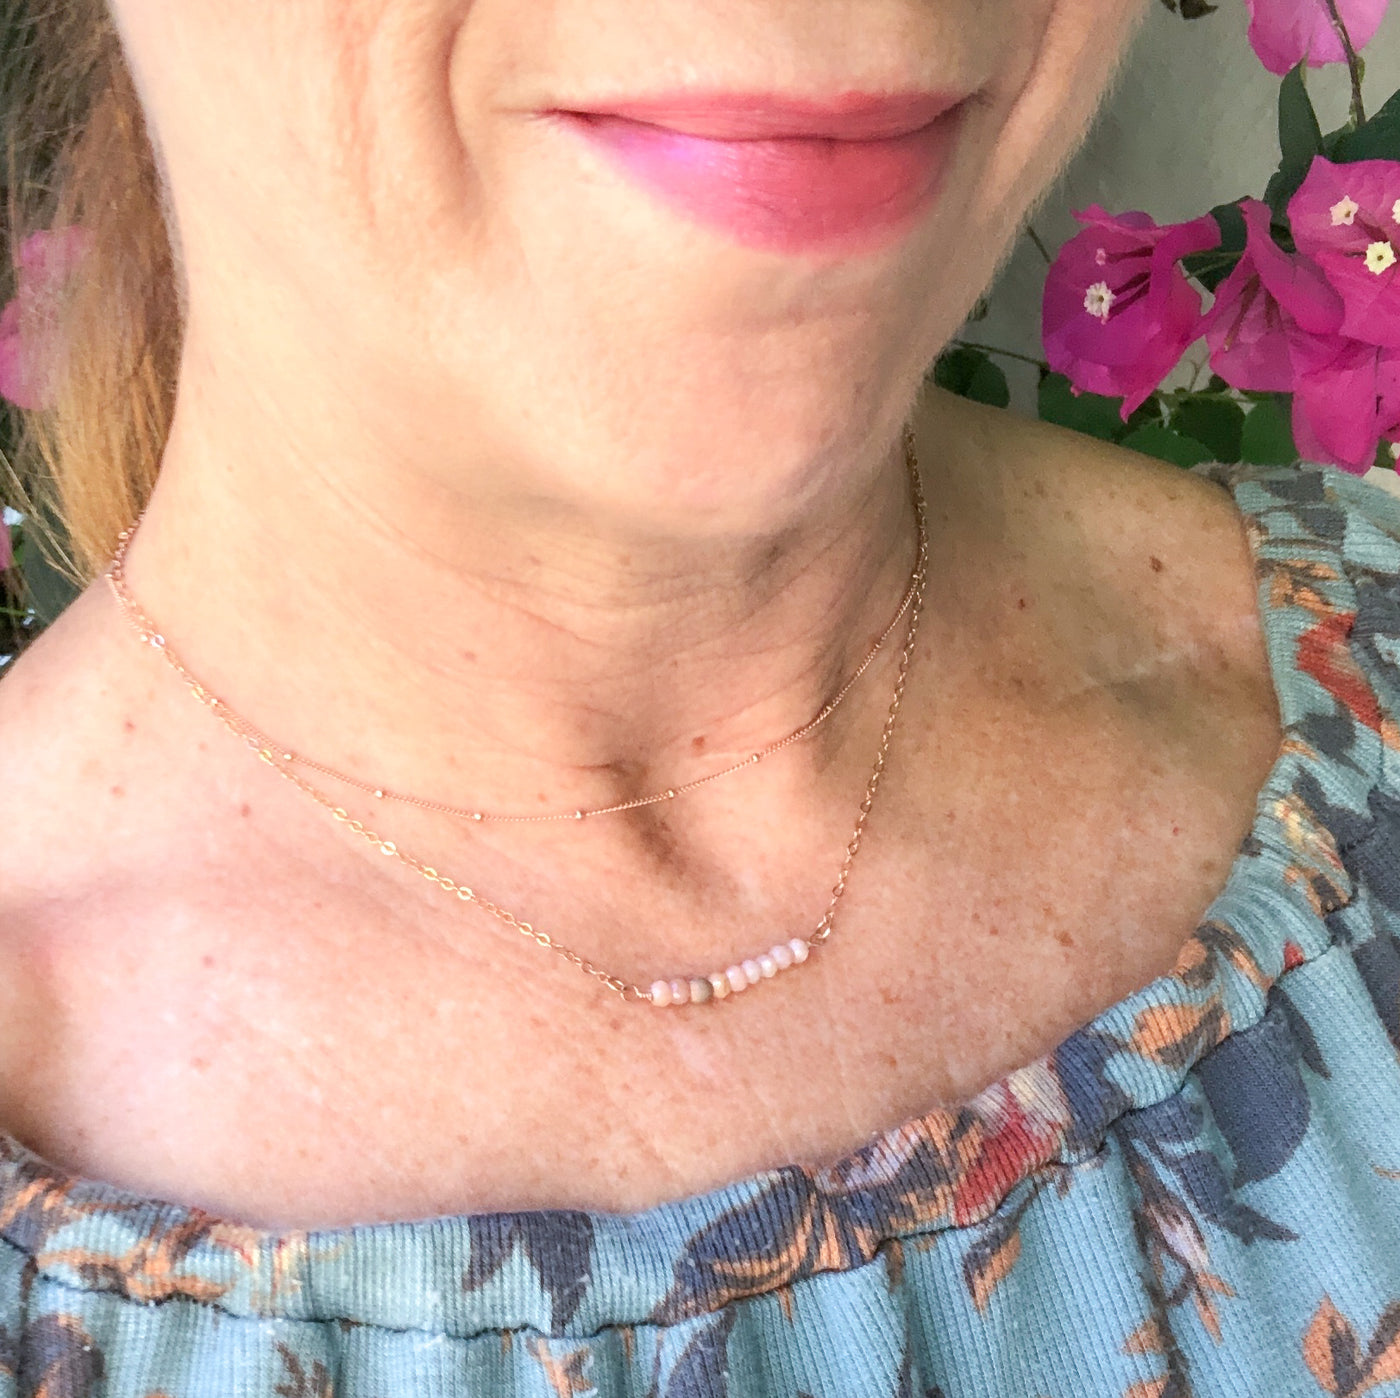 Delicate Pink Opal gemstone and Rose Gold-filled bar necklace. Perfect alone or for layering. The shine of the Rose Gold stardust bead compliments the opals nicely and gives the necklace an air of sophistication. Laura modeling.